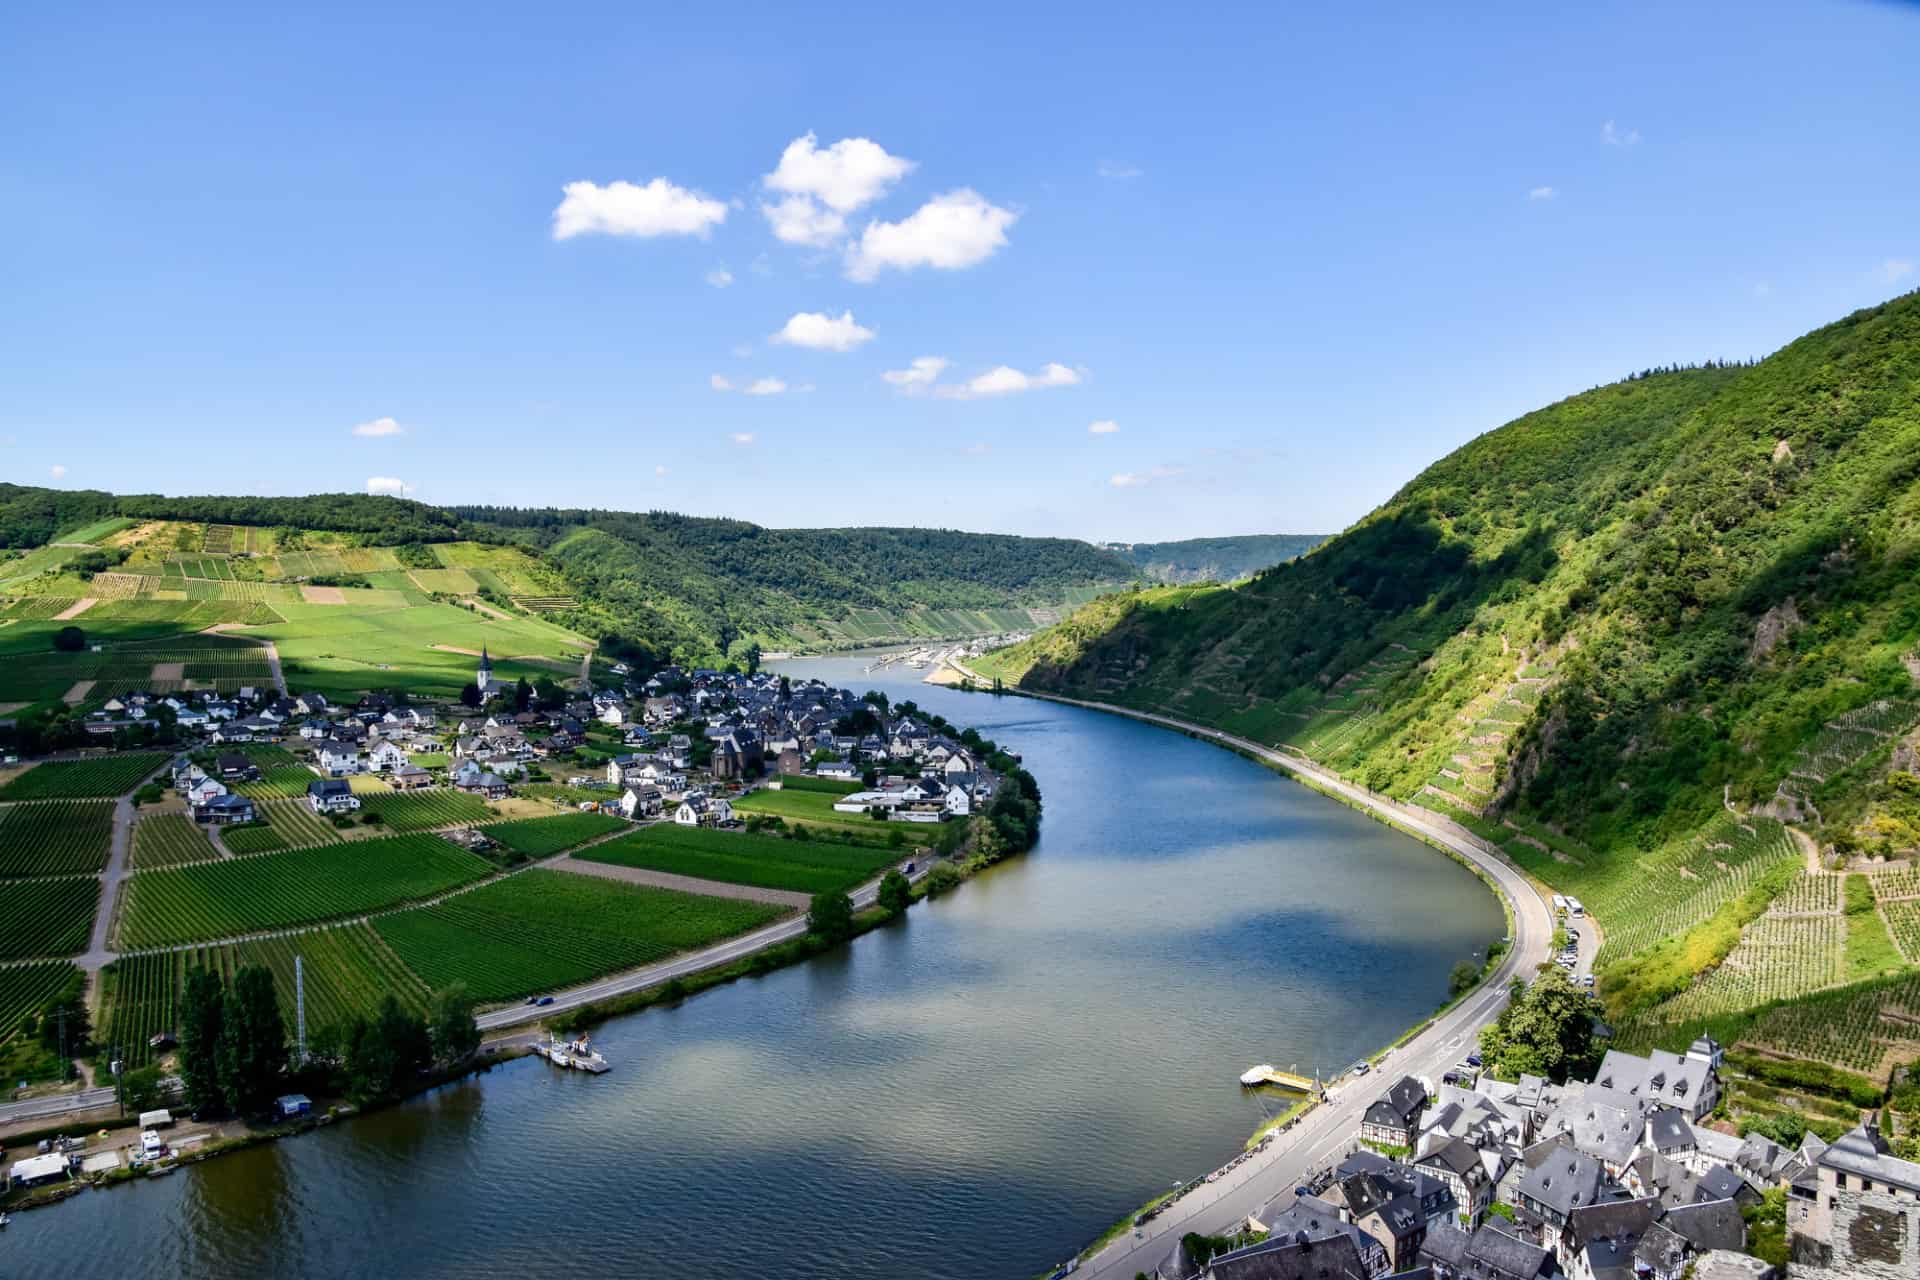 Where is the Moselle River?